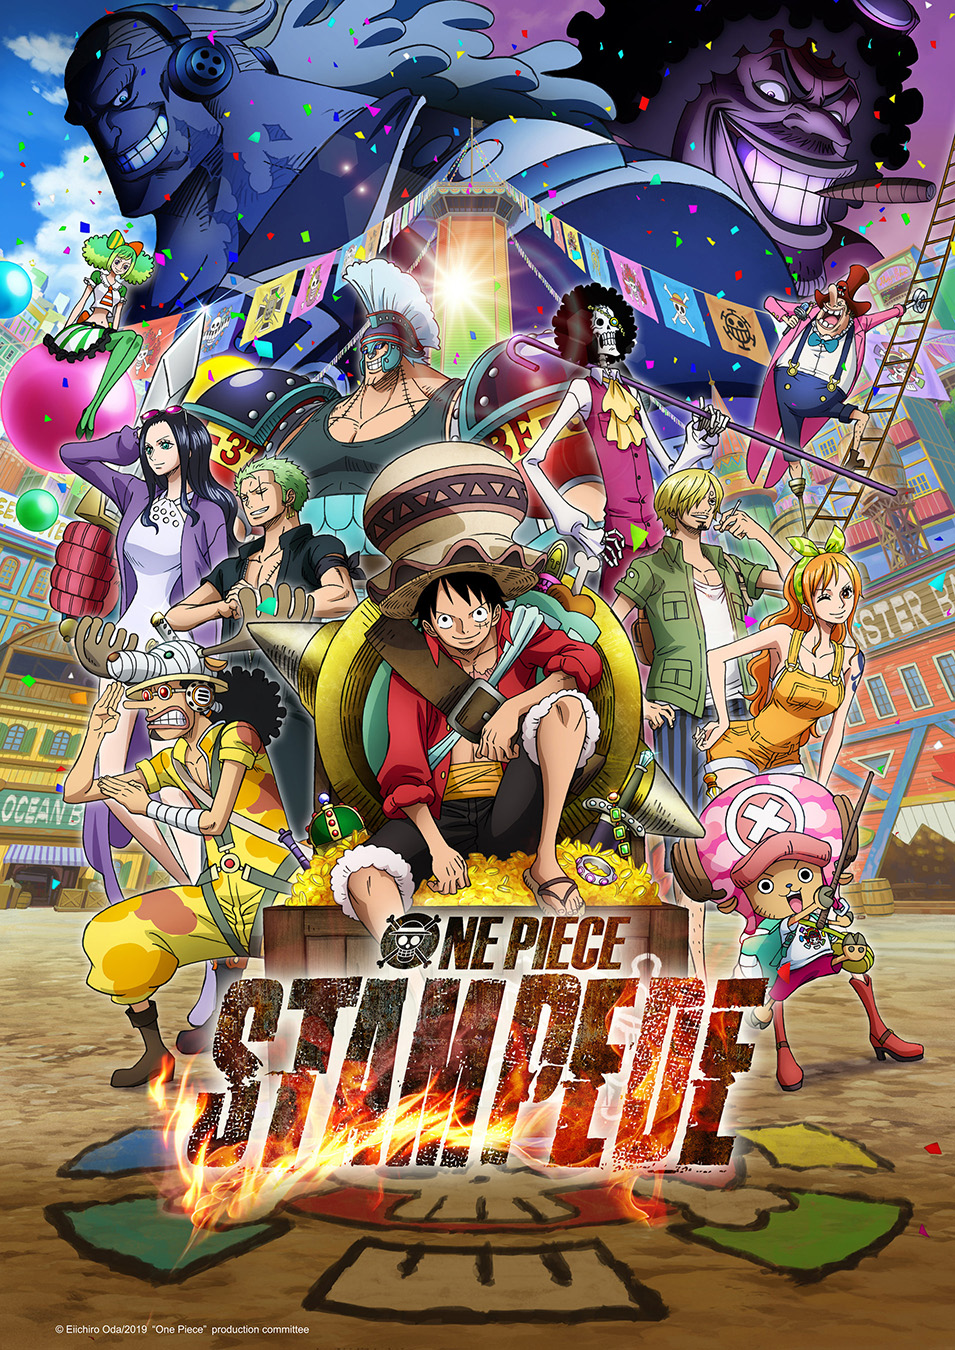 Buster Call, One Piece: Stampede (Official Sub Clip), A buster call? 😳  [via One Piece: Stampede] 🎟👉  By One Piece